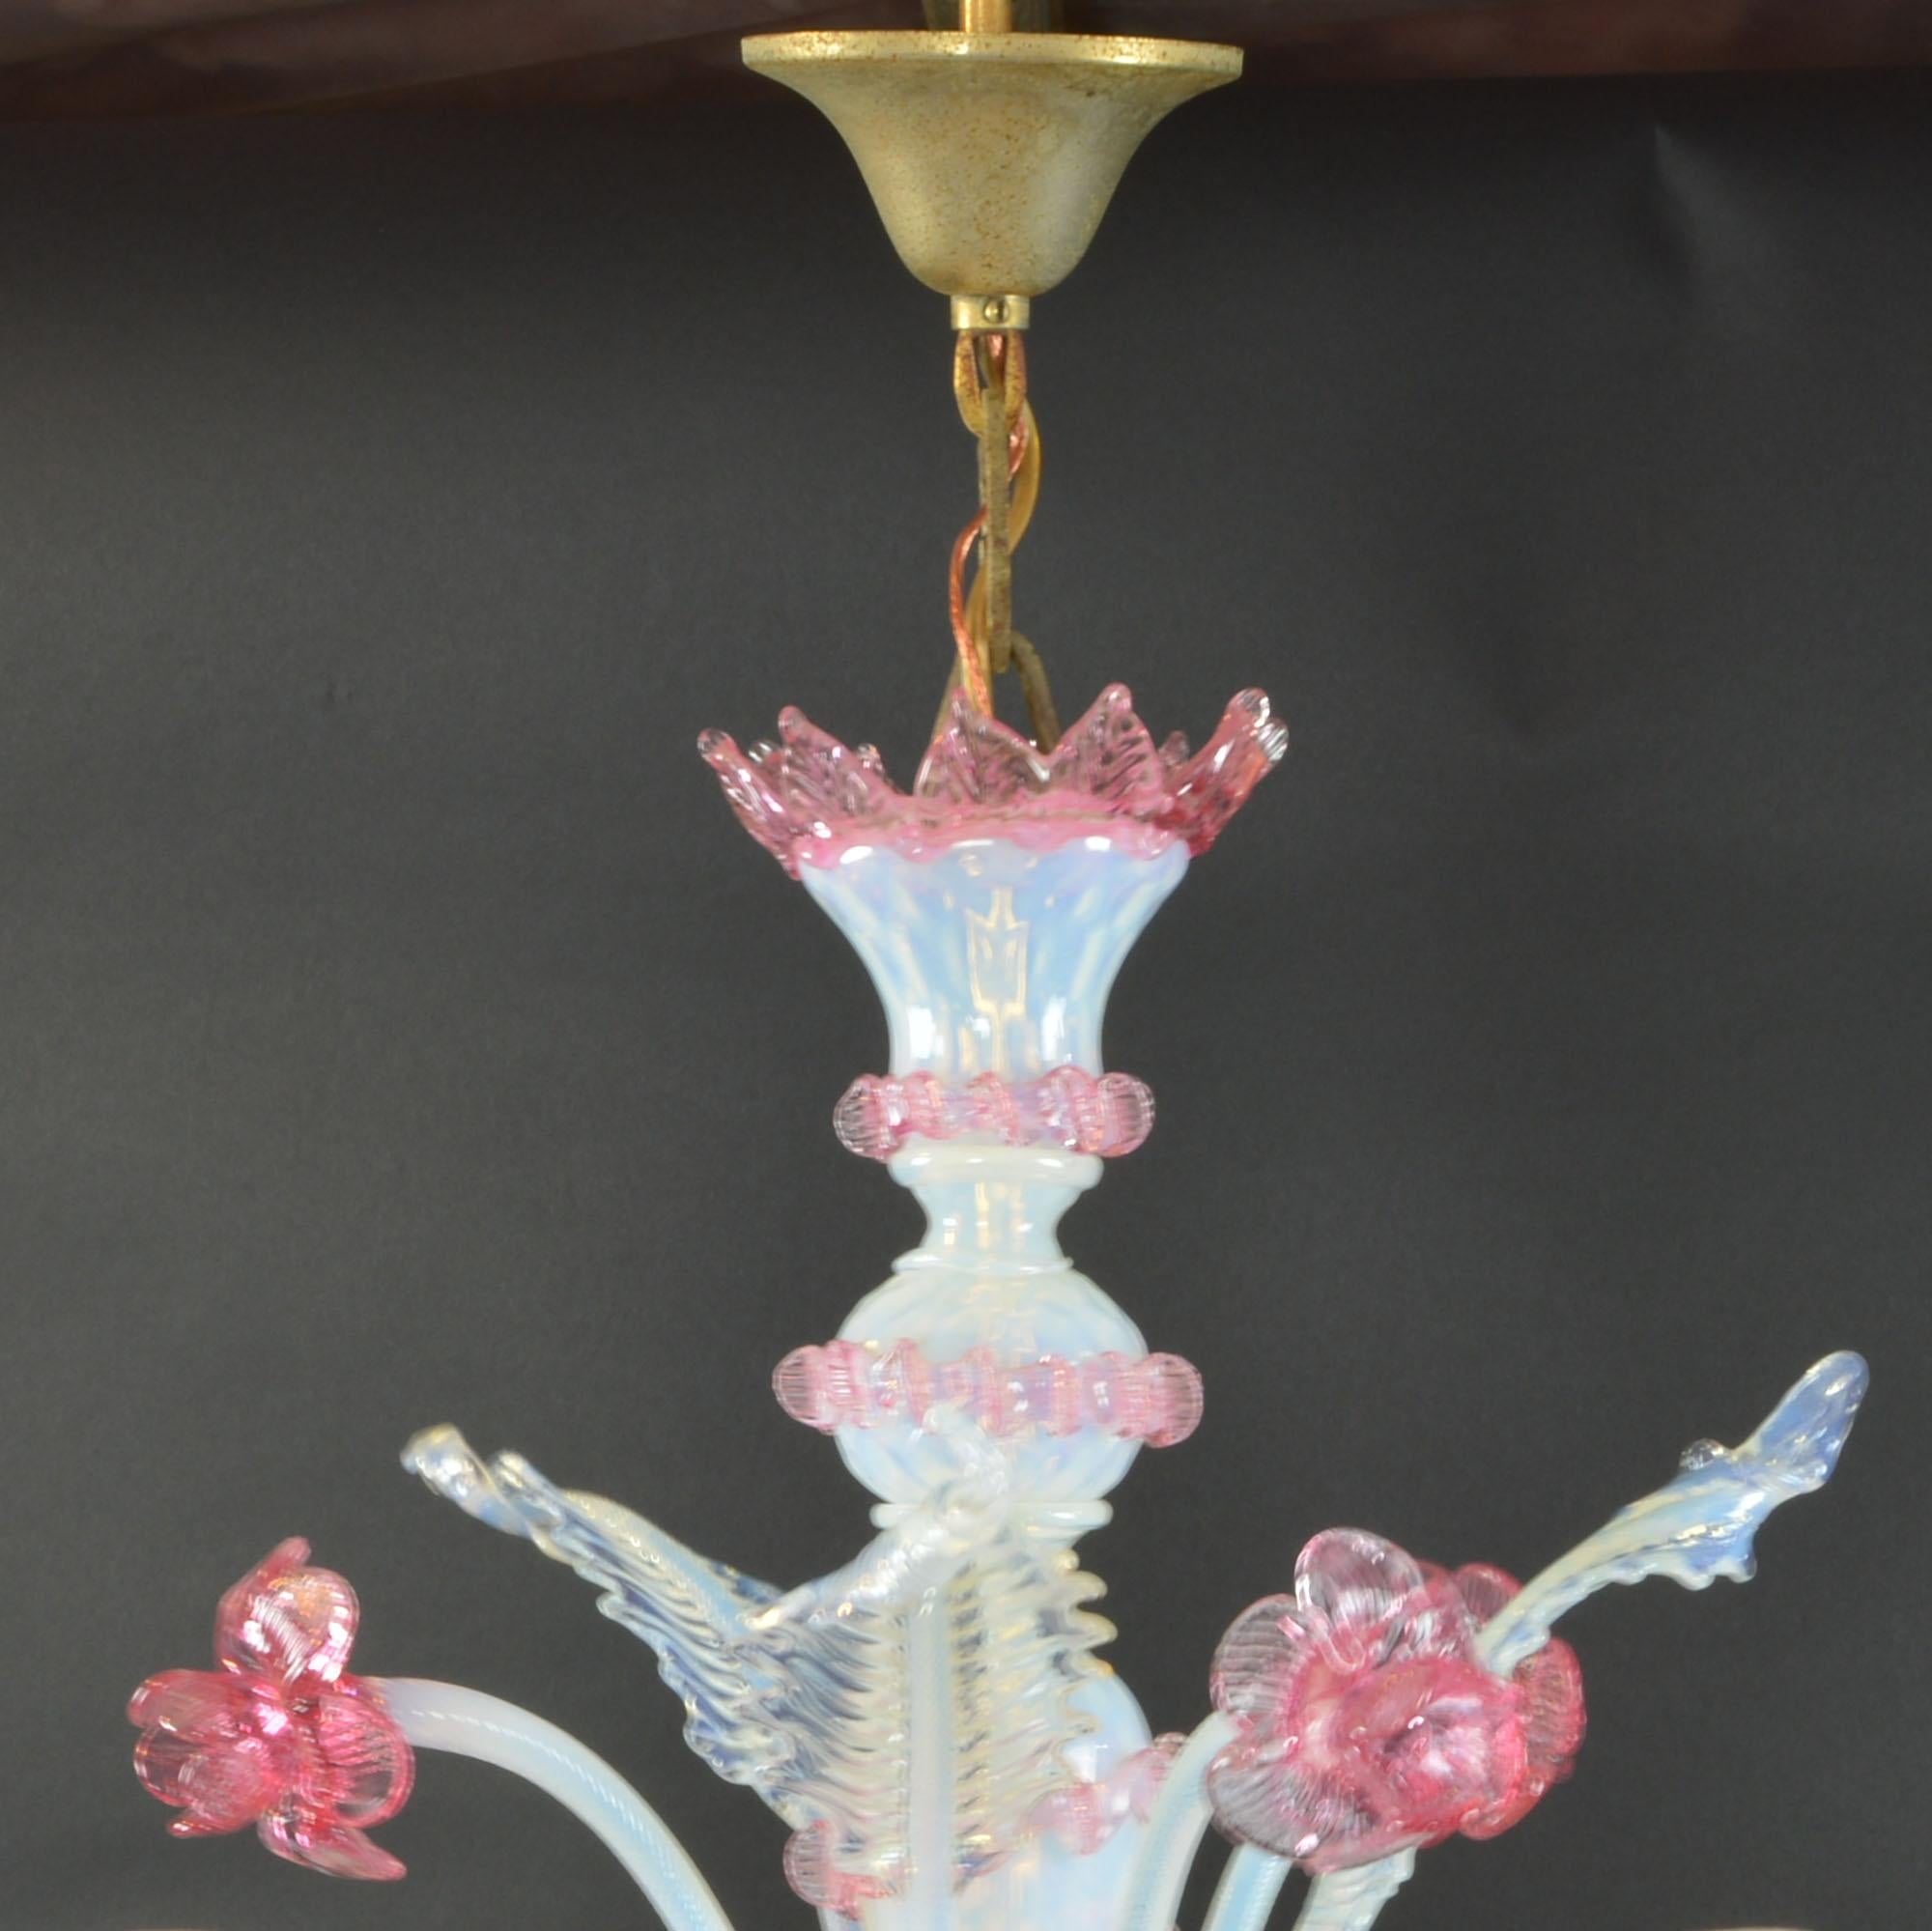 Lovely antique Venetian opalescent glass chandelier in an intriguing white with lovely pink accent color. Venetian glass chandelier has several handcrafted large daffodils and six candle style lights. The lights are mounted on six softly scrolled